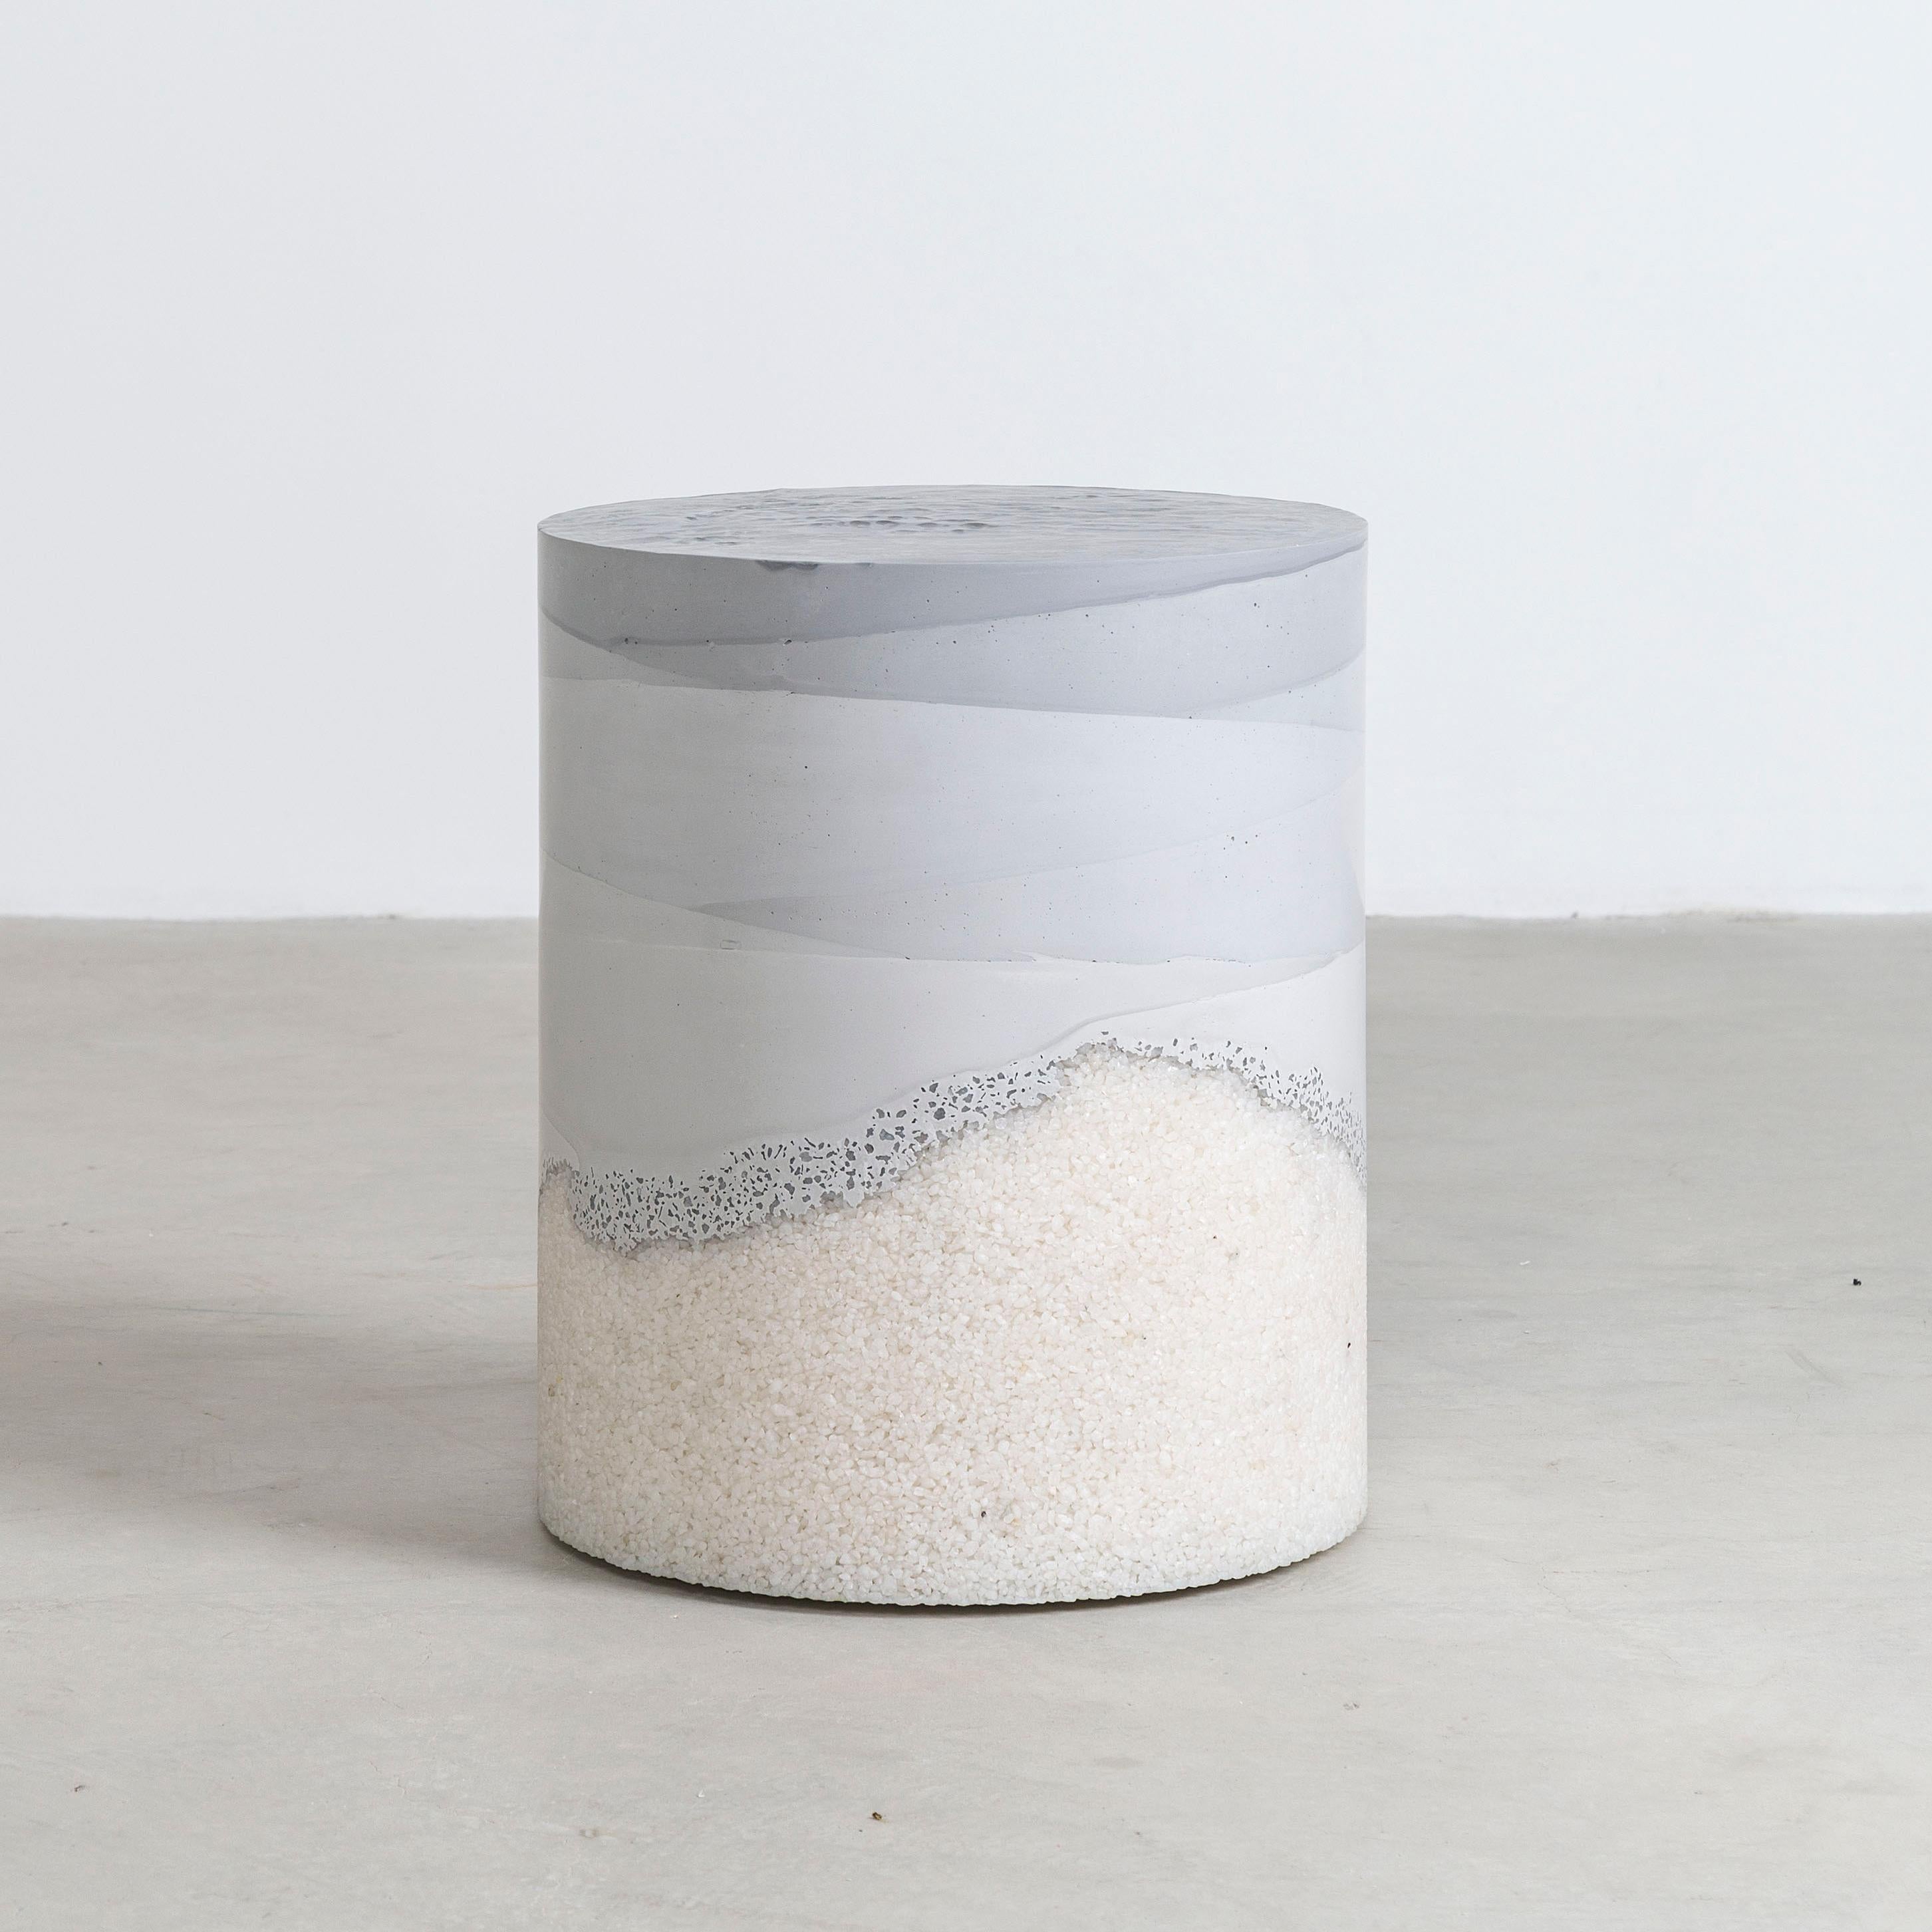 Composed in a language of landscape-oriented abstraction, the made-to-order custom drum is cast from hand-dyed grey fade cement and crystal quartz. Poured by hand over the white granules, the grey cement combines the materials to create an effect